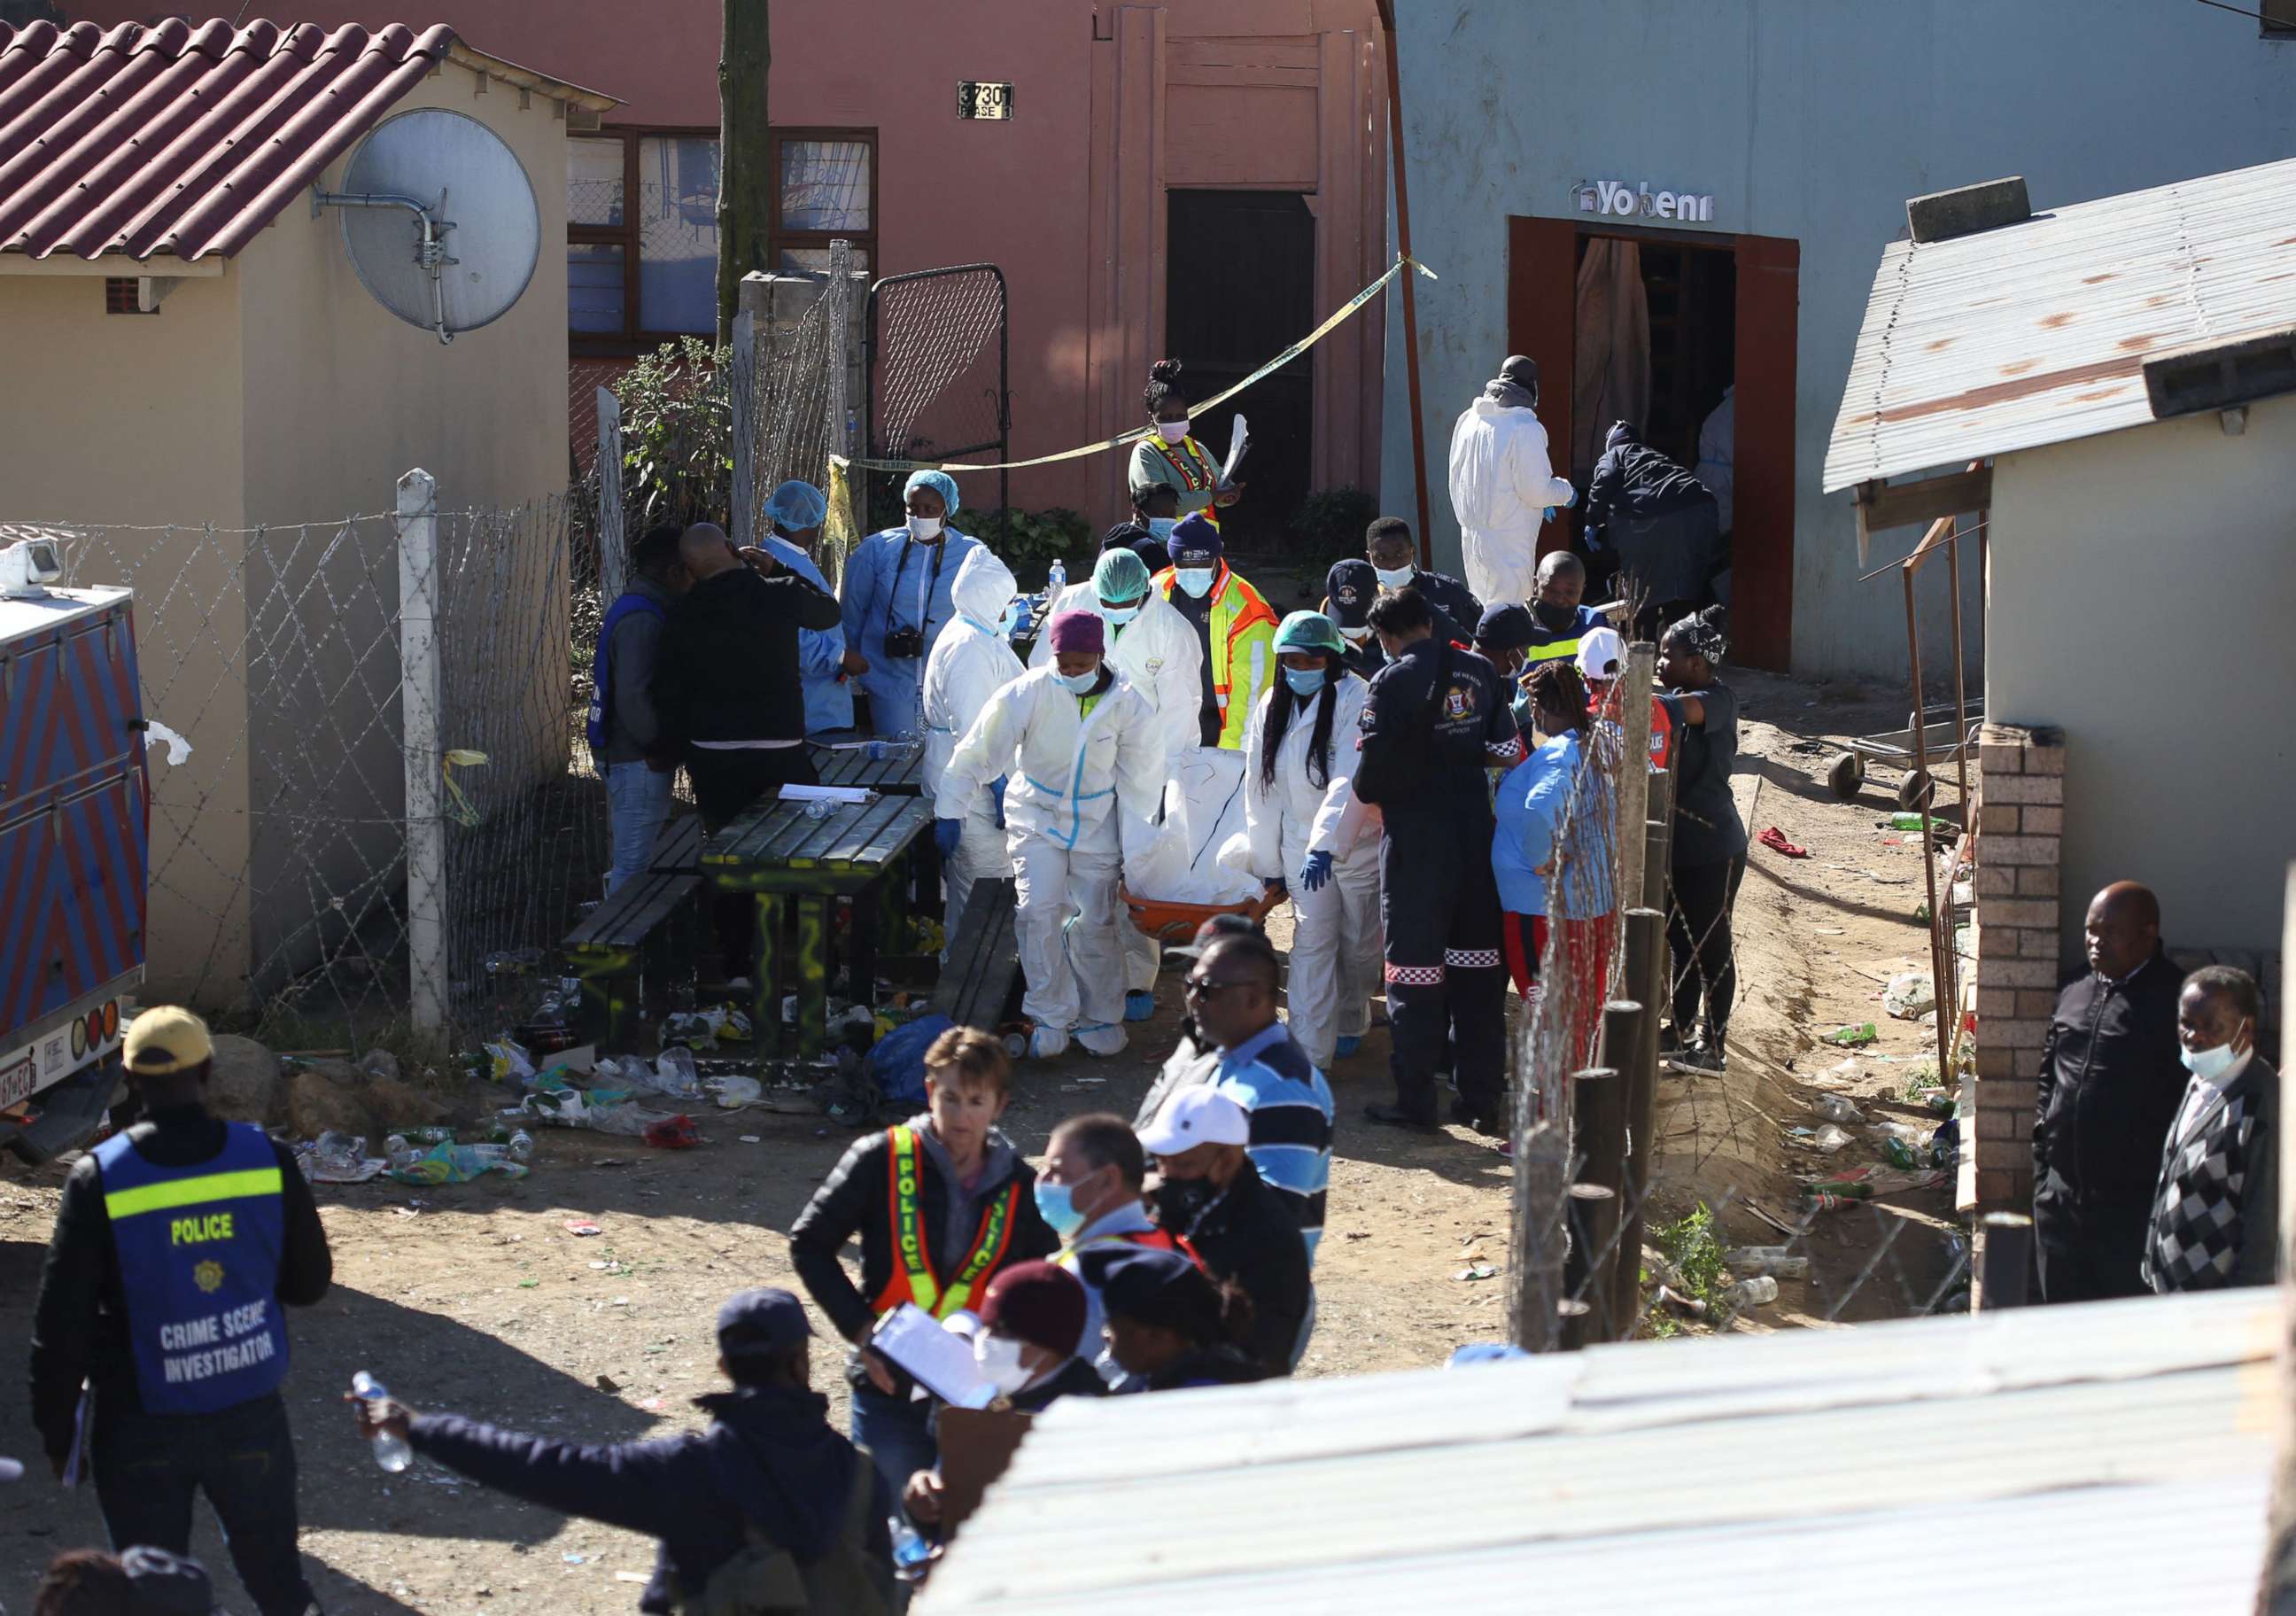 PHOTO: Forensic personnel carry a body out of a township pub in South Africa's southern city of East London on June 26, 2022, after 20 teenagers died.